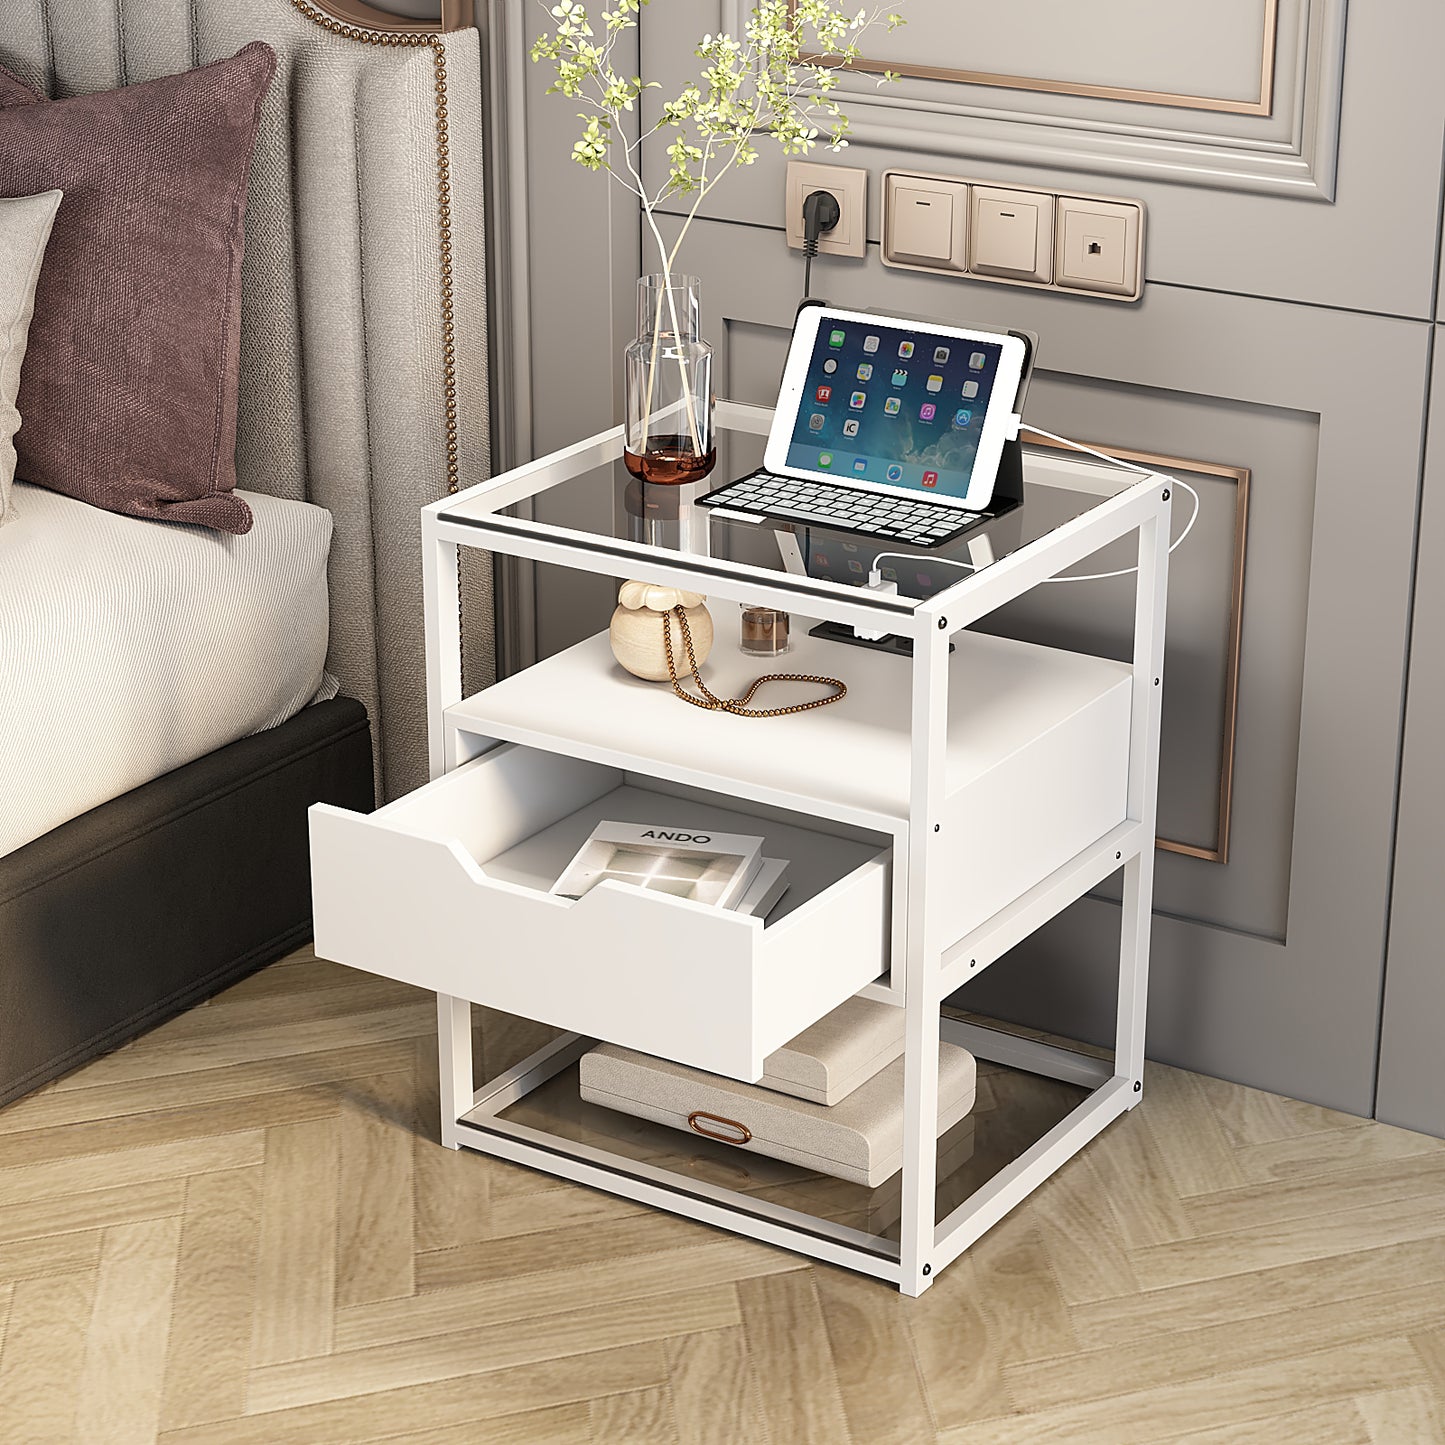 Nightstand, End Table with Fabric Storage Drawer and Open Wood Shelf, Bedside Furniture with Steel Frame